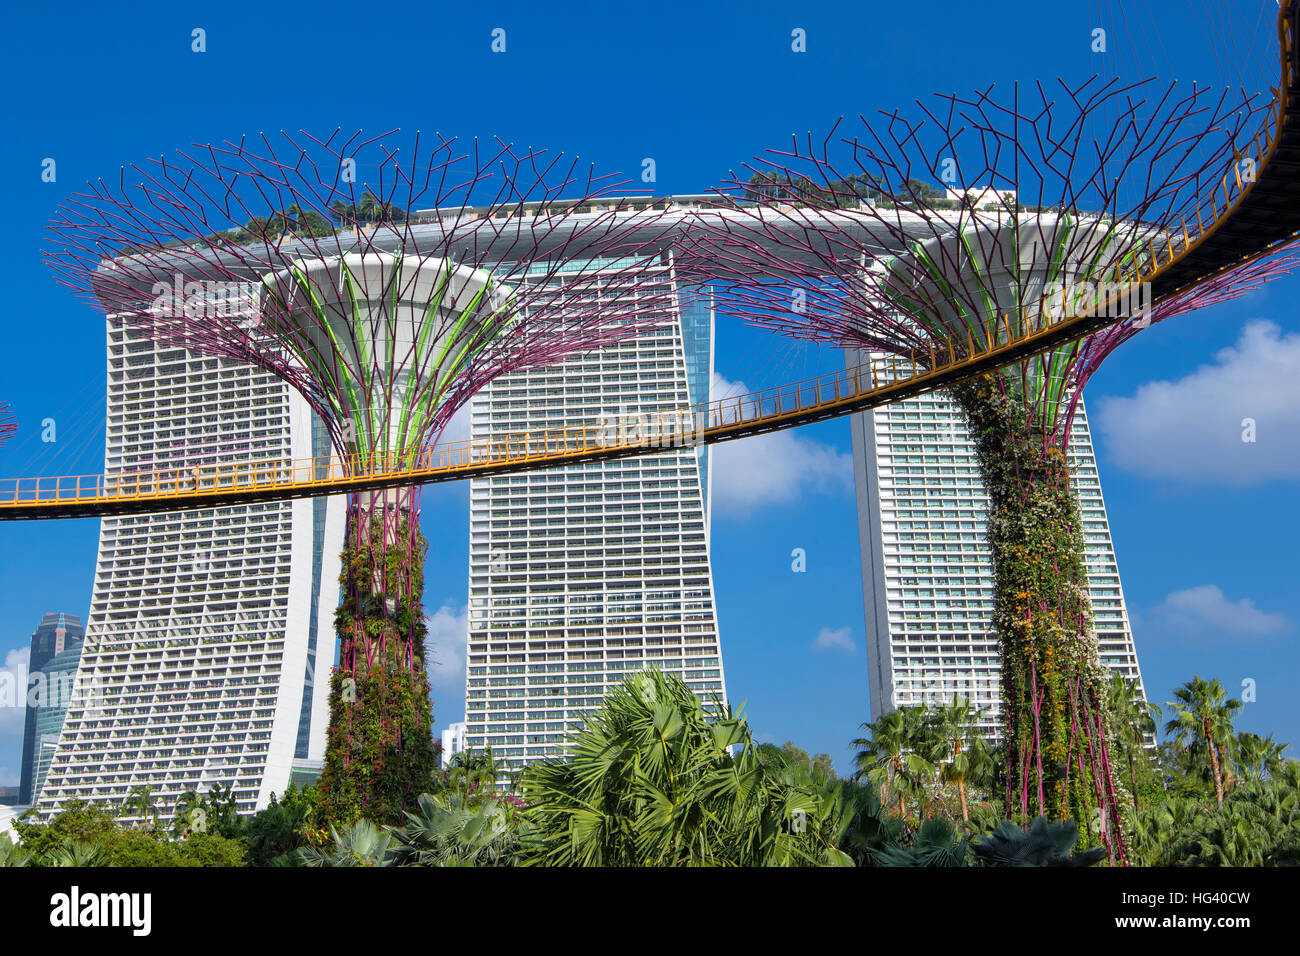 Gardens by the bay and Marina Bay Sands hotel, Singapore Stock